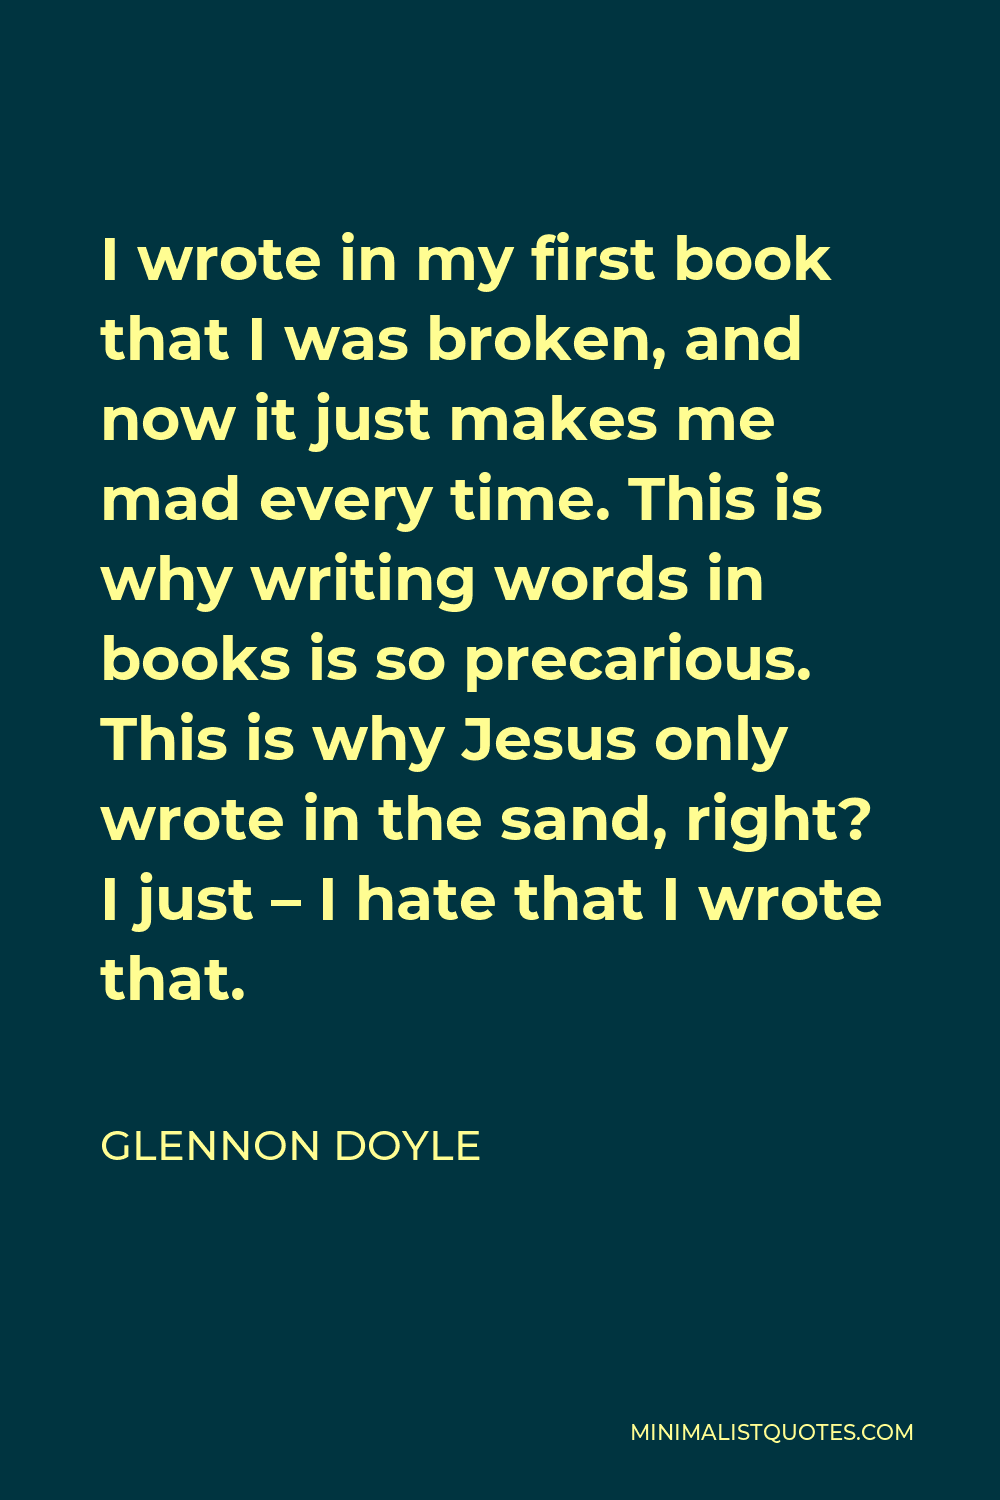 Glennon Doyle Quote - I wrote in my first book that I was broken, and now it just makes me mad every time. This is why writing words in books is so precarious. This is why Jesus only wrote in the sand, right? I just – I hate that I wrote that.